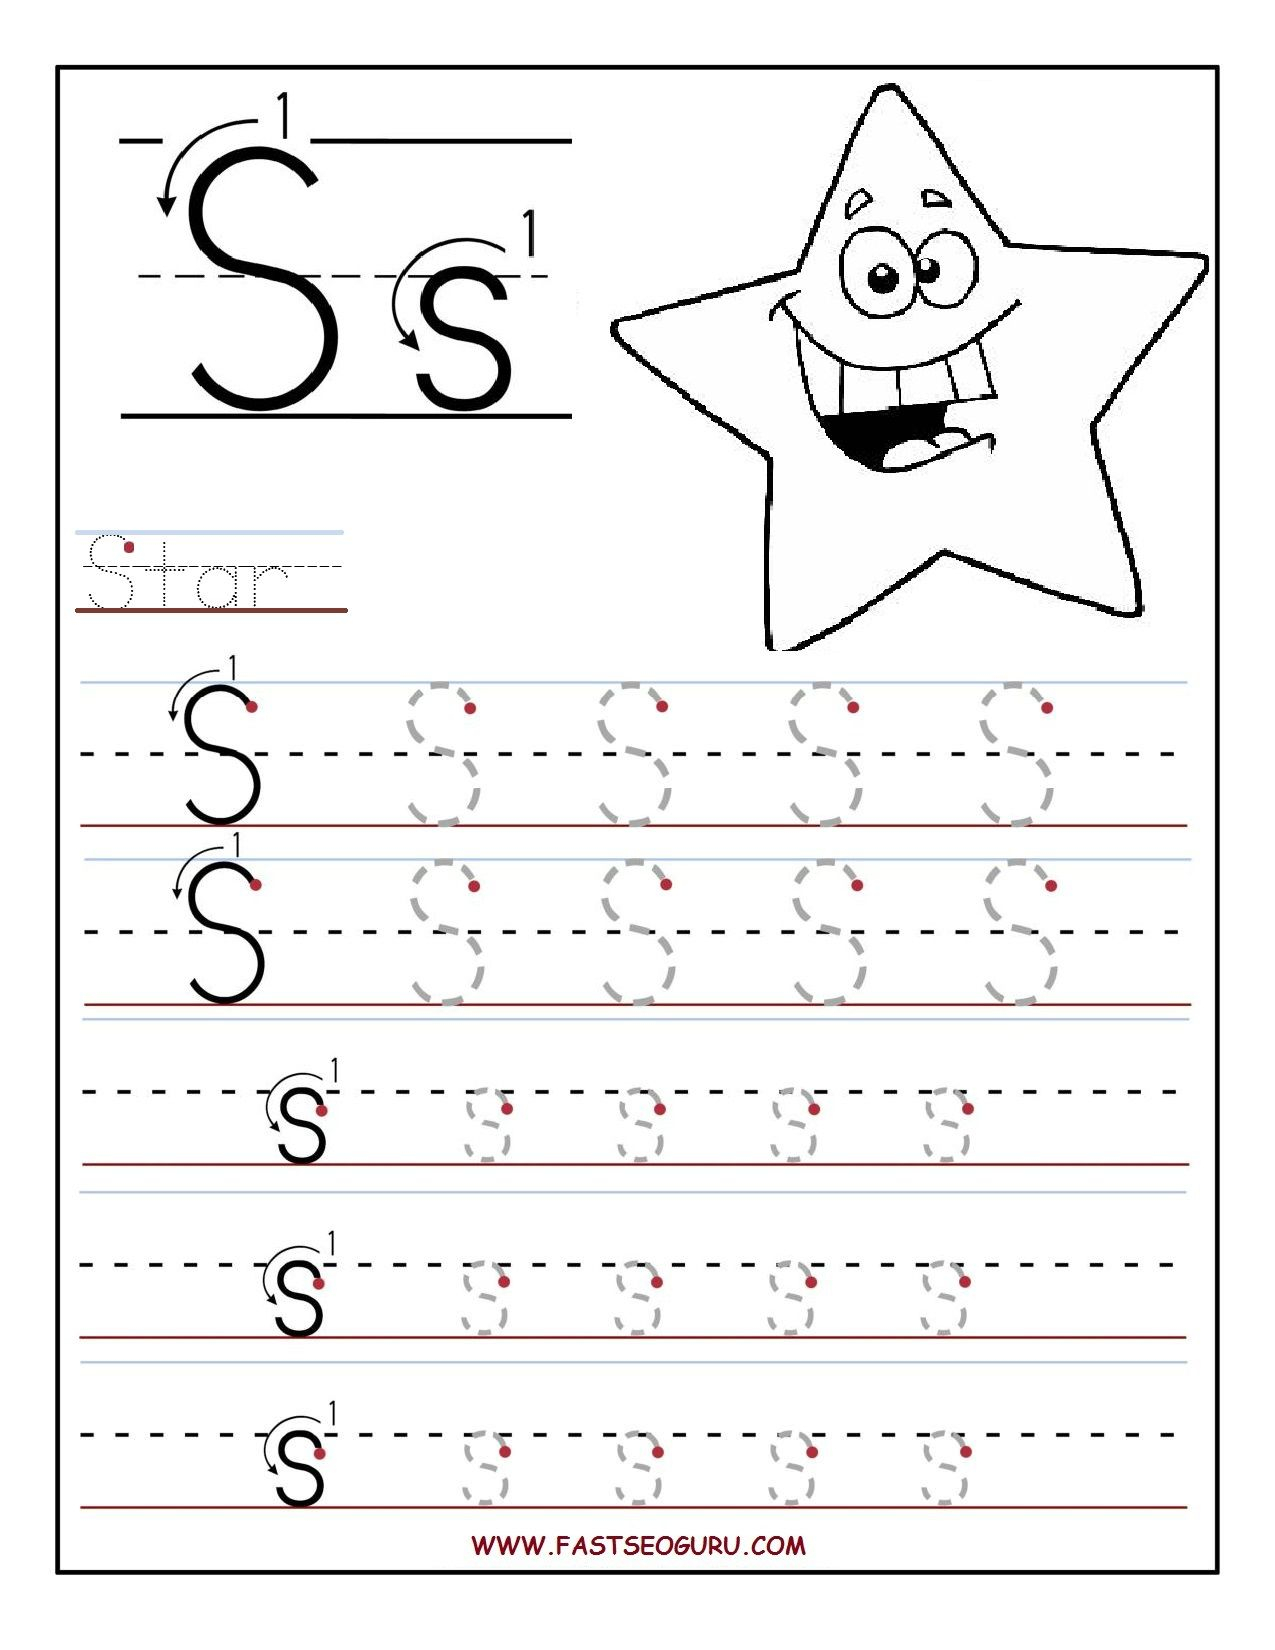 Fastseoguru Files Printable%20Letter%20S%20Tracing in Letter S Tracing Worksheets For Preschool